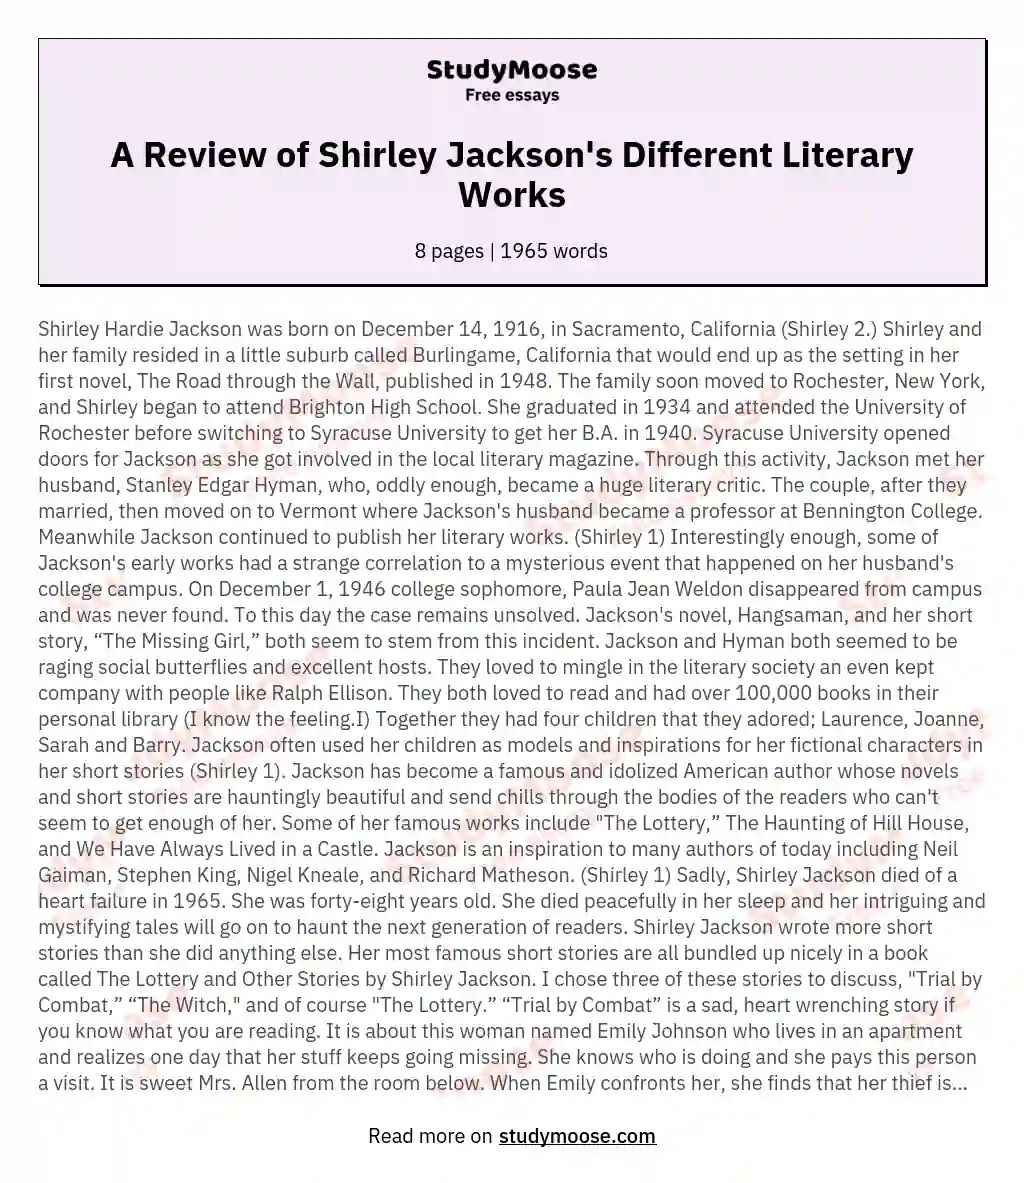 A Review of Shirley Jackson's Different Literary Works essay